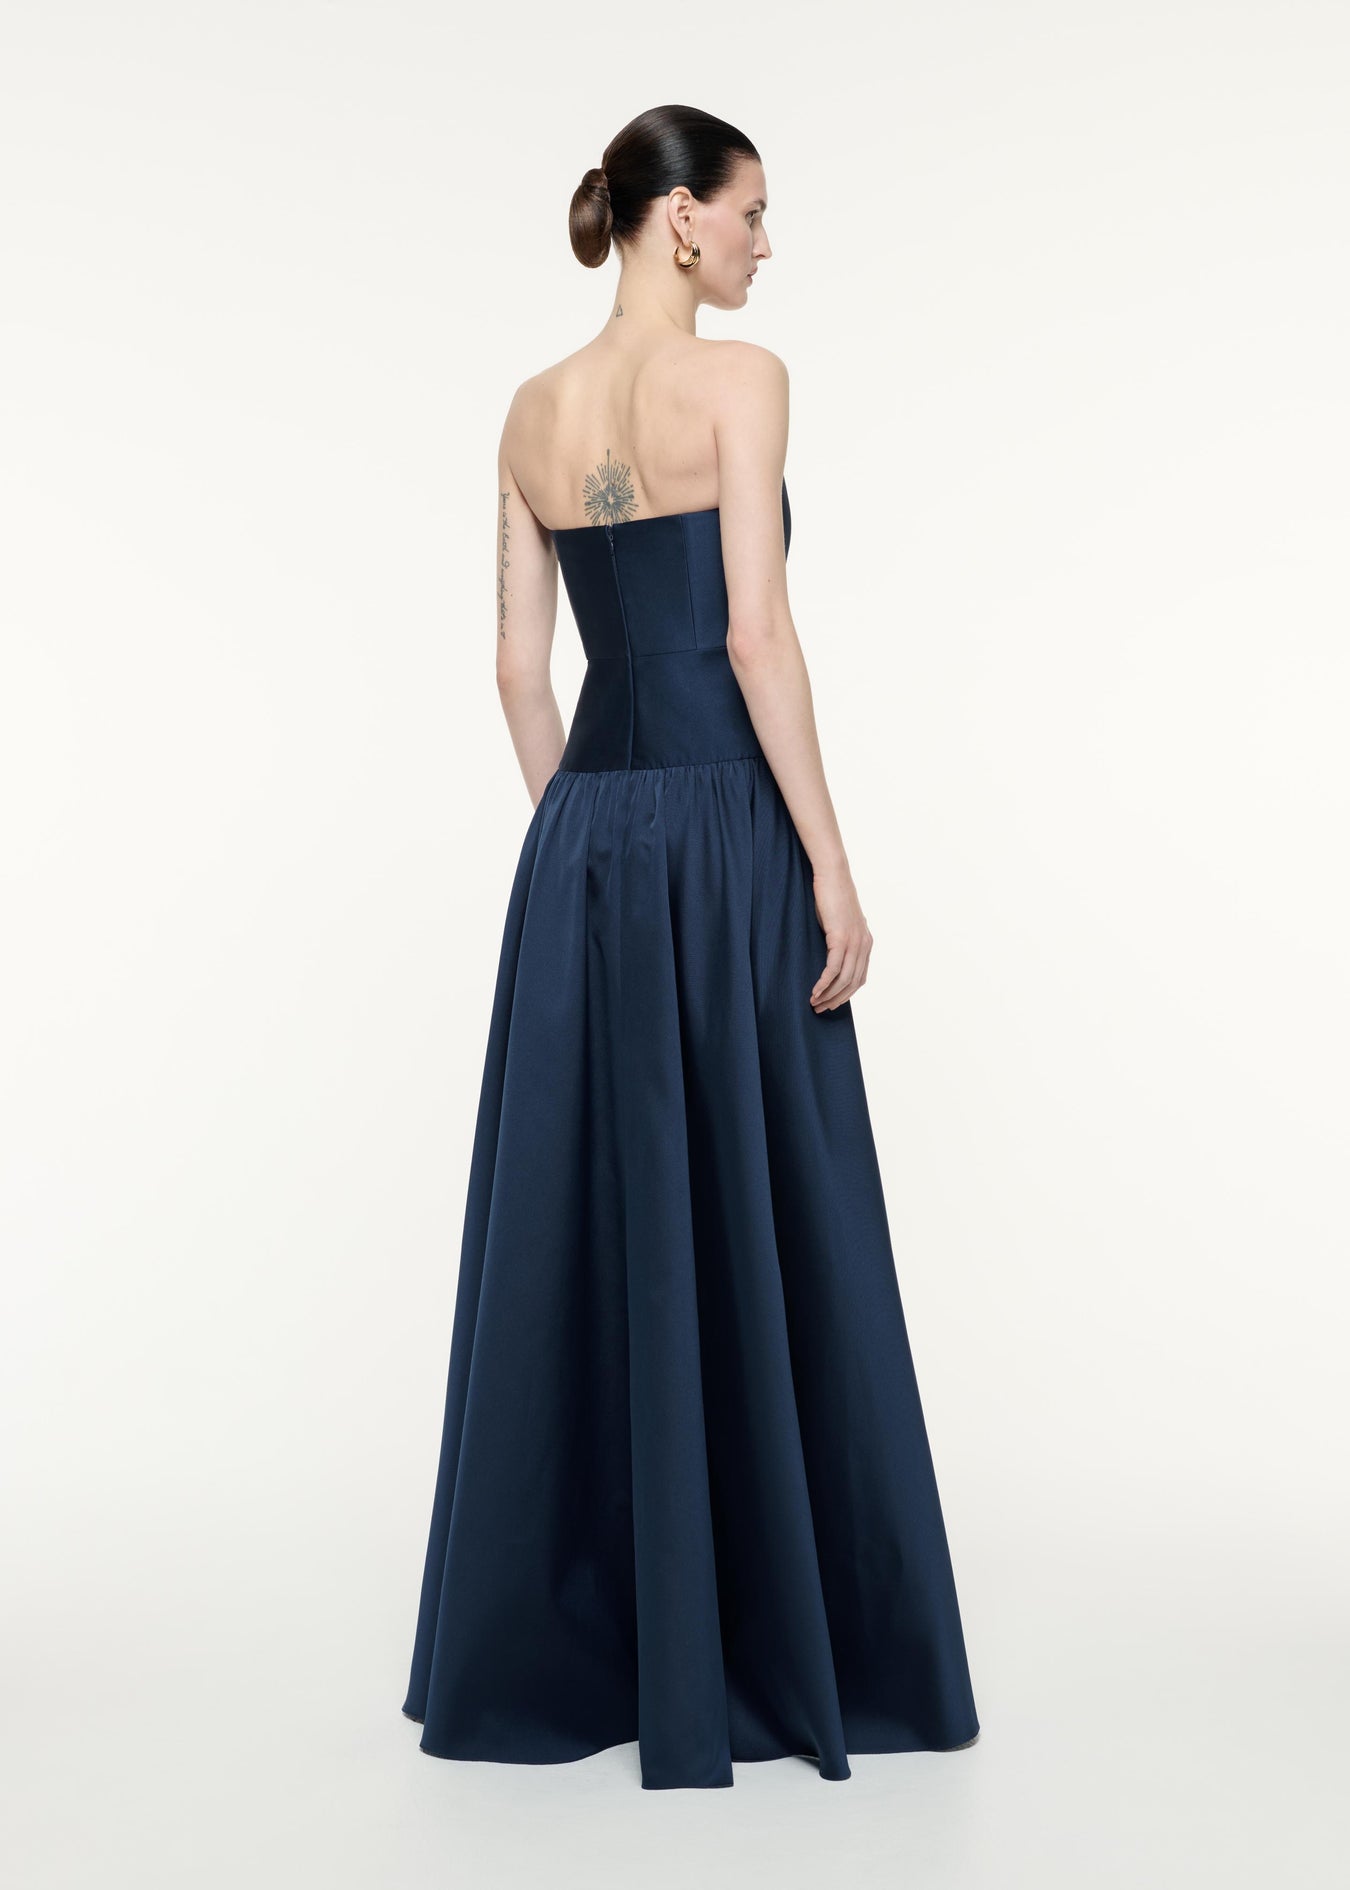 A back view image of a model wearing the Strapless Taffeta Gown in Navy